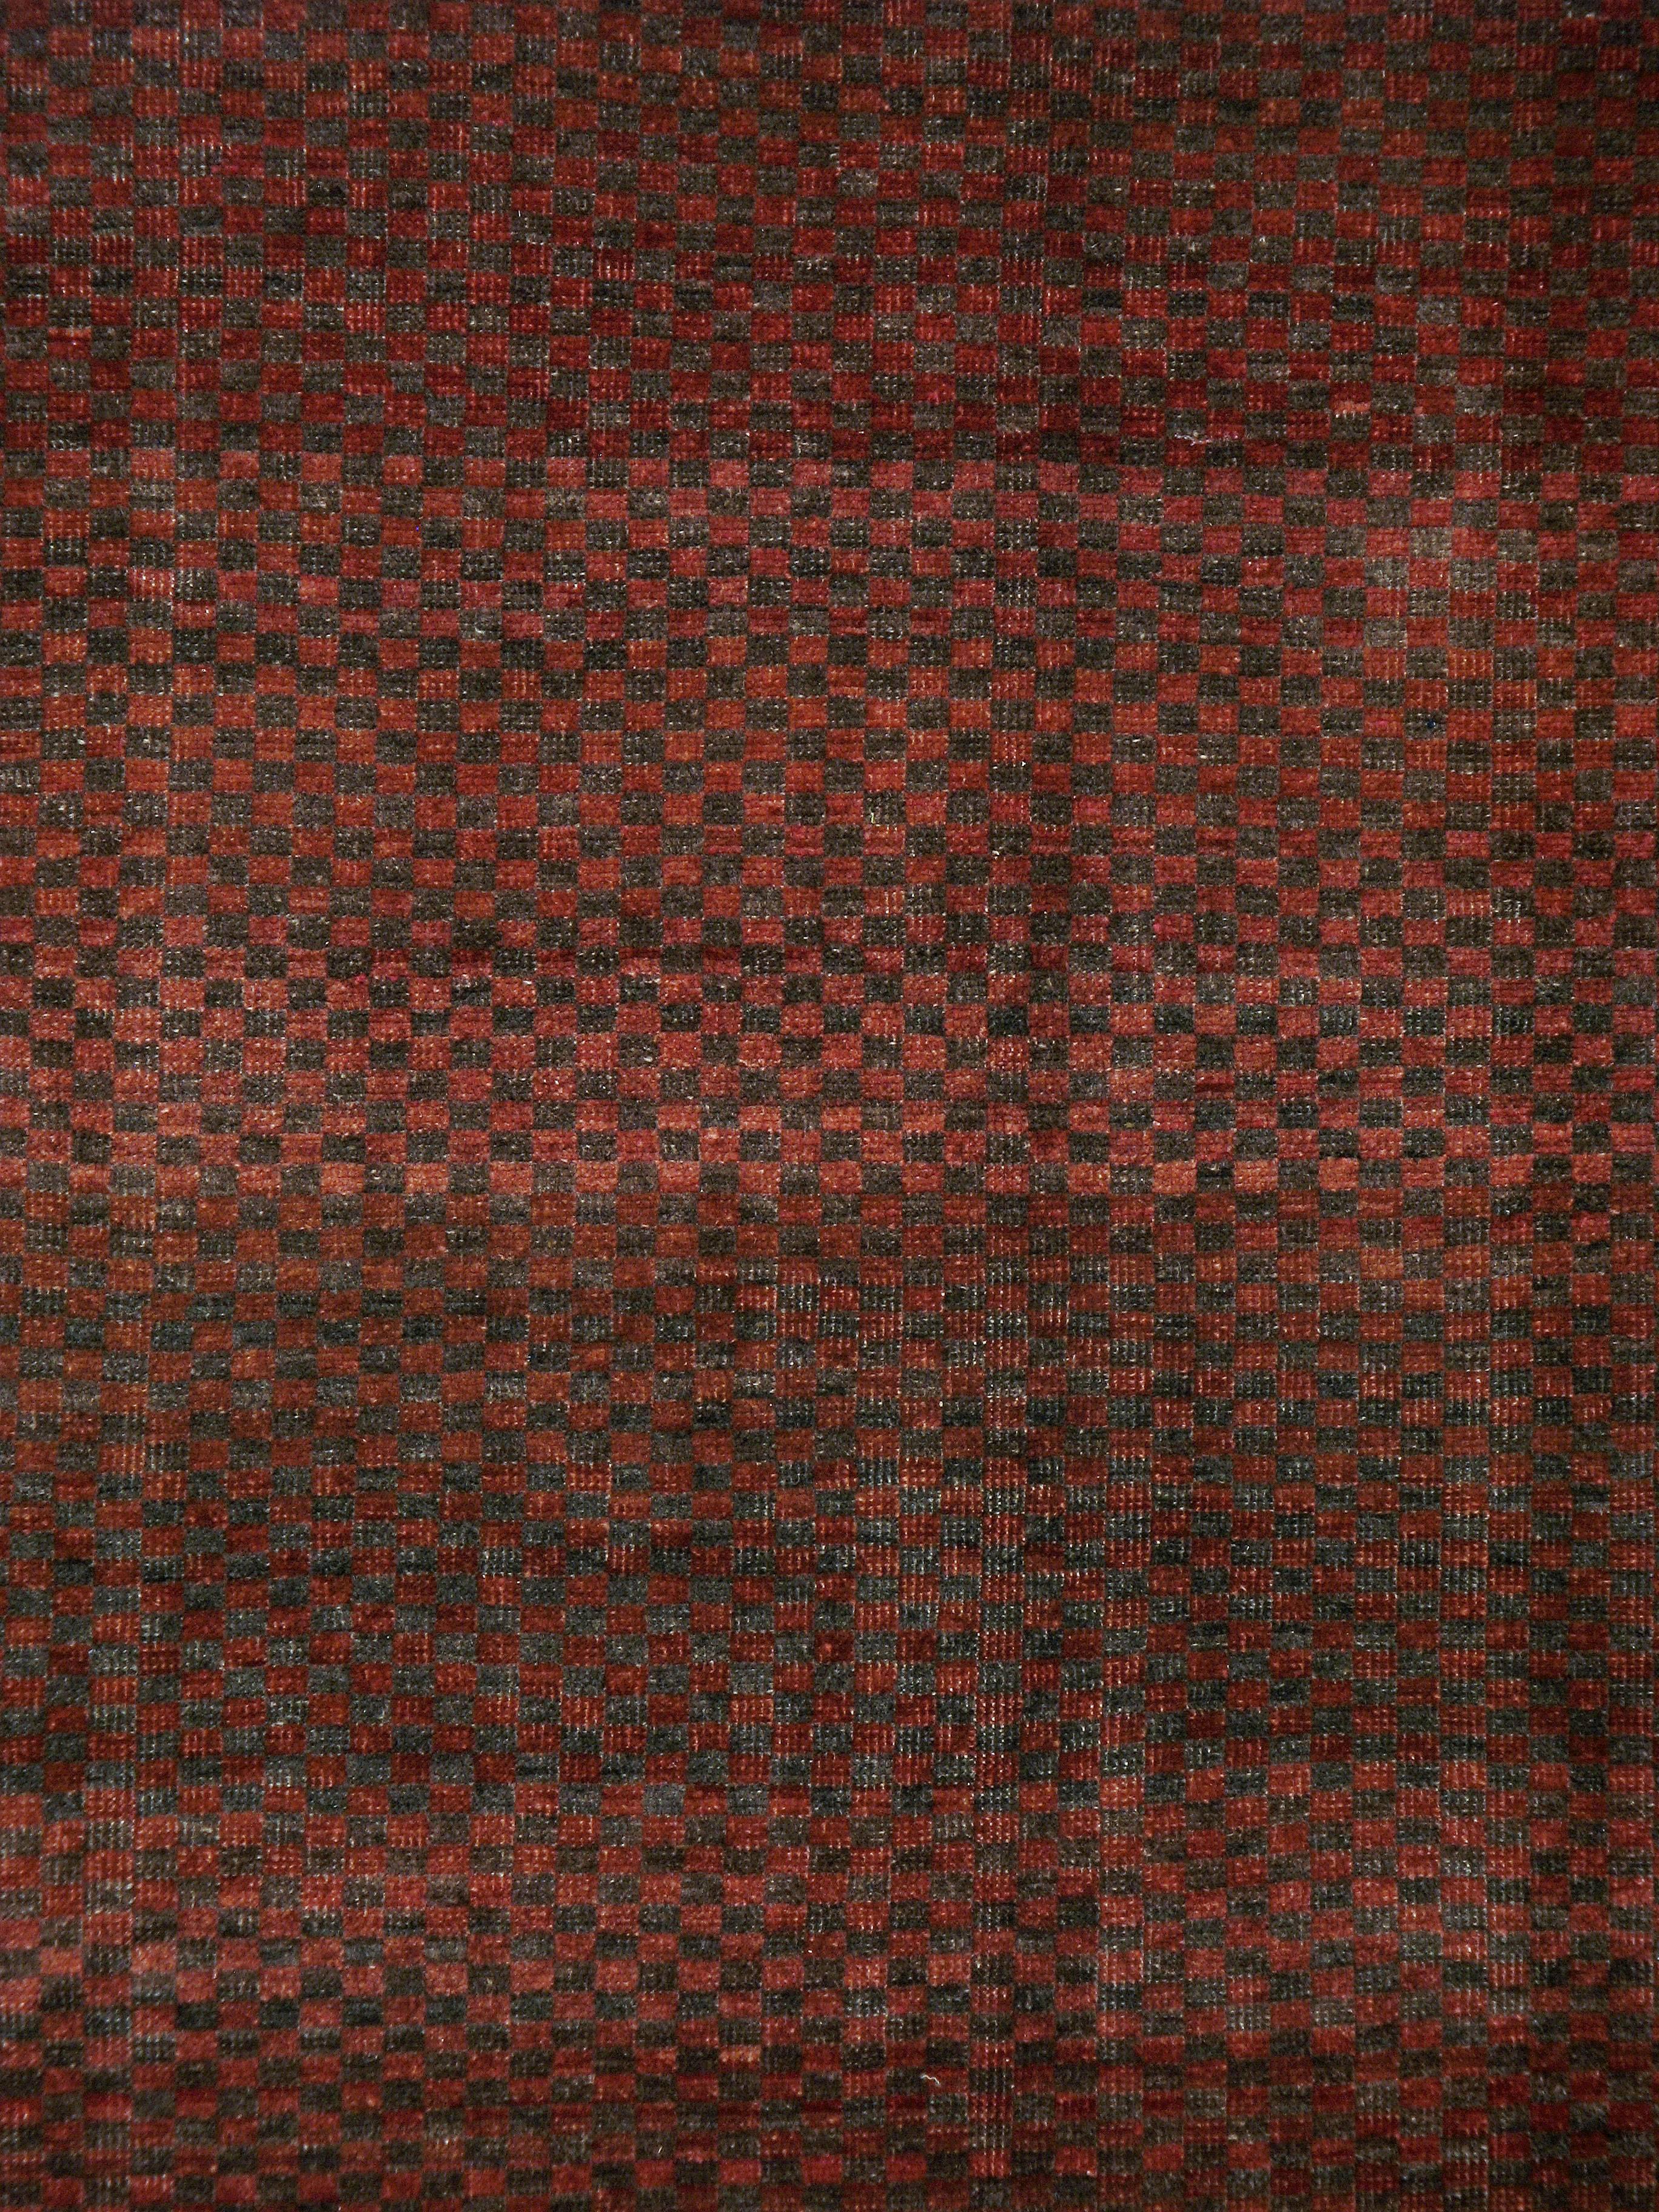 A vintage Turkish Anatolian carpet from the second quarter of the 20th century with a checkerboard pattern in maroon and chocolate.